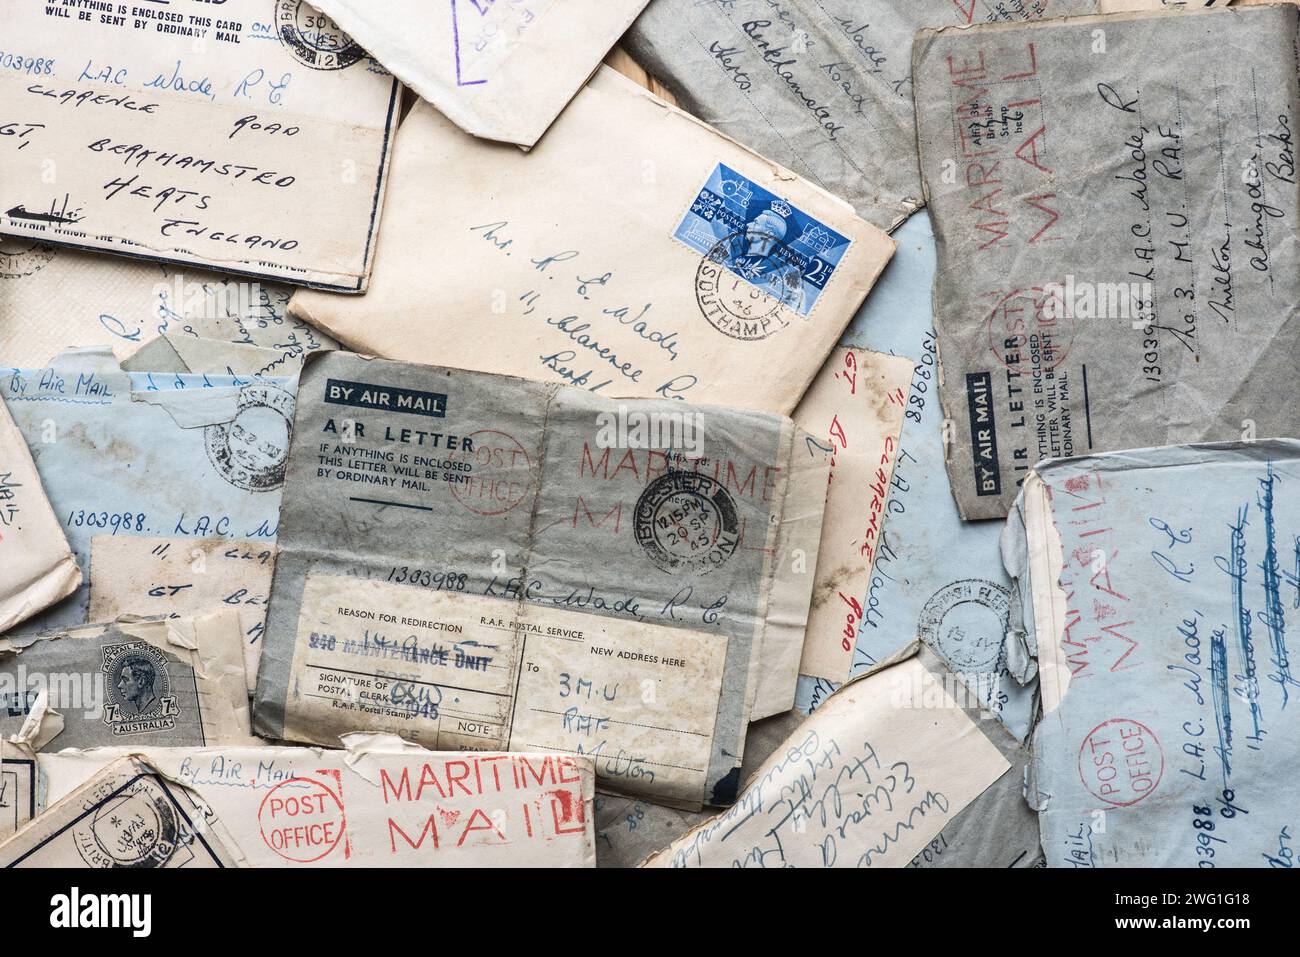 WW2 air mail letters via Maritime mail from a Wren to an RAF gentleman showing mail marks, censor etc staying in touch in hard times. Stock Photo